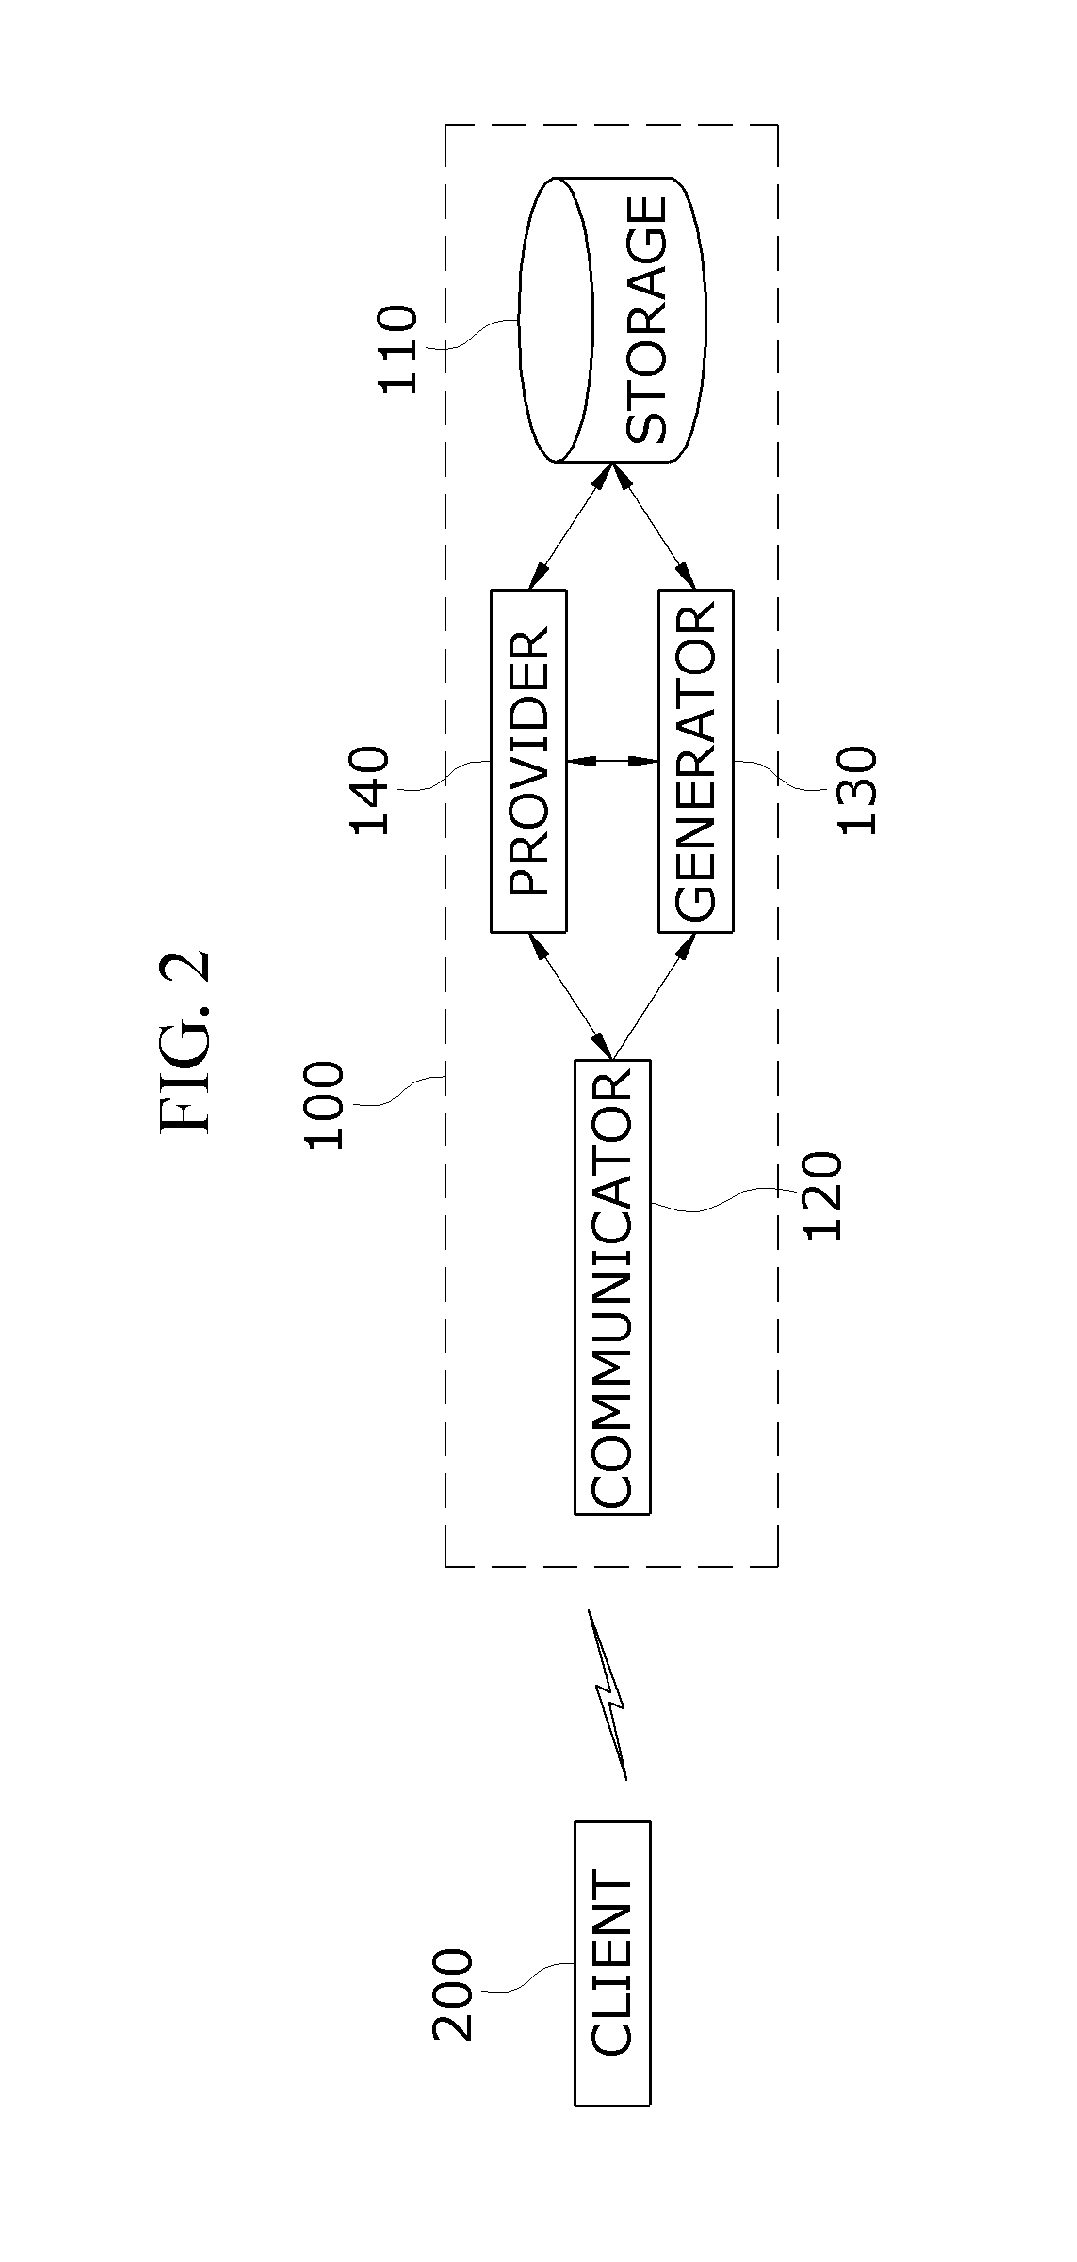 Tile map service device and method